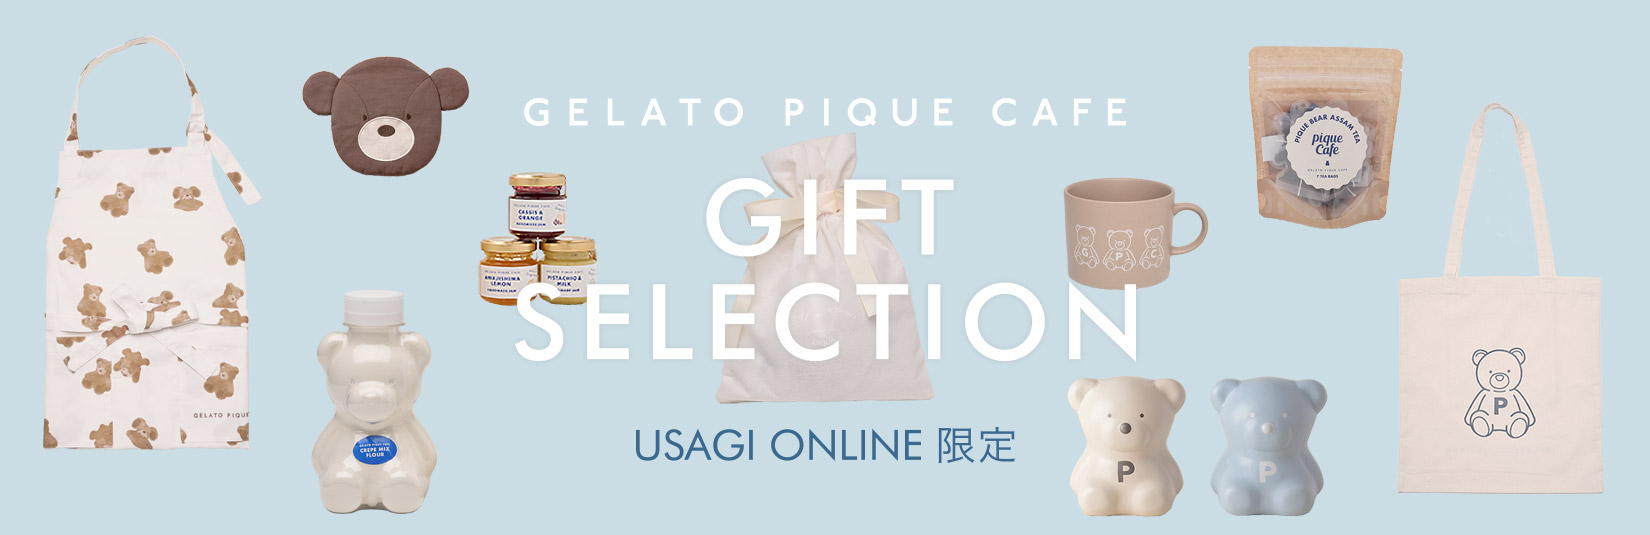 GIFT SELECTION  From gelato pique cafe